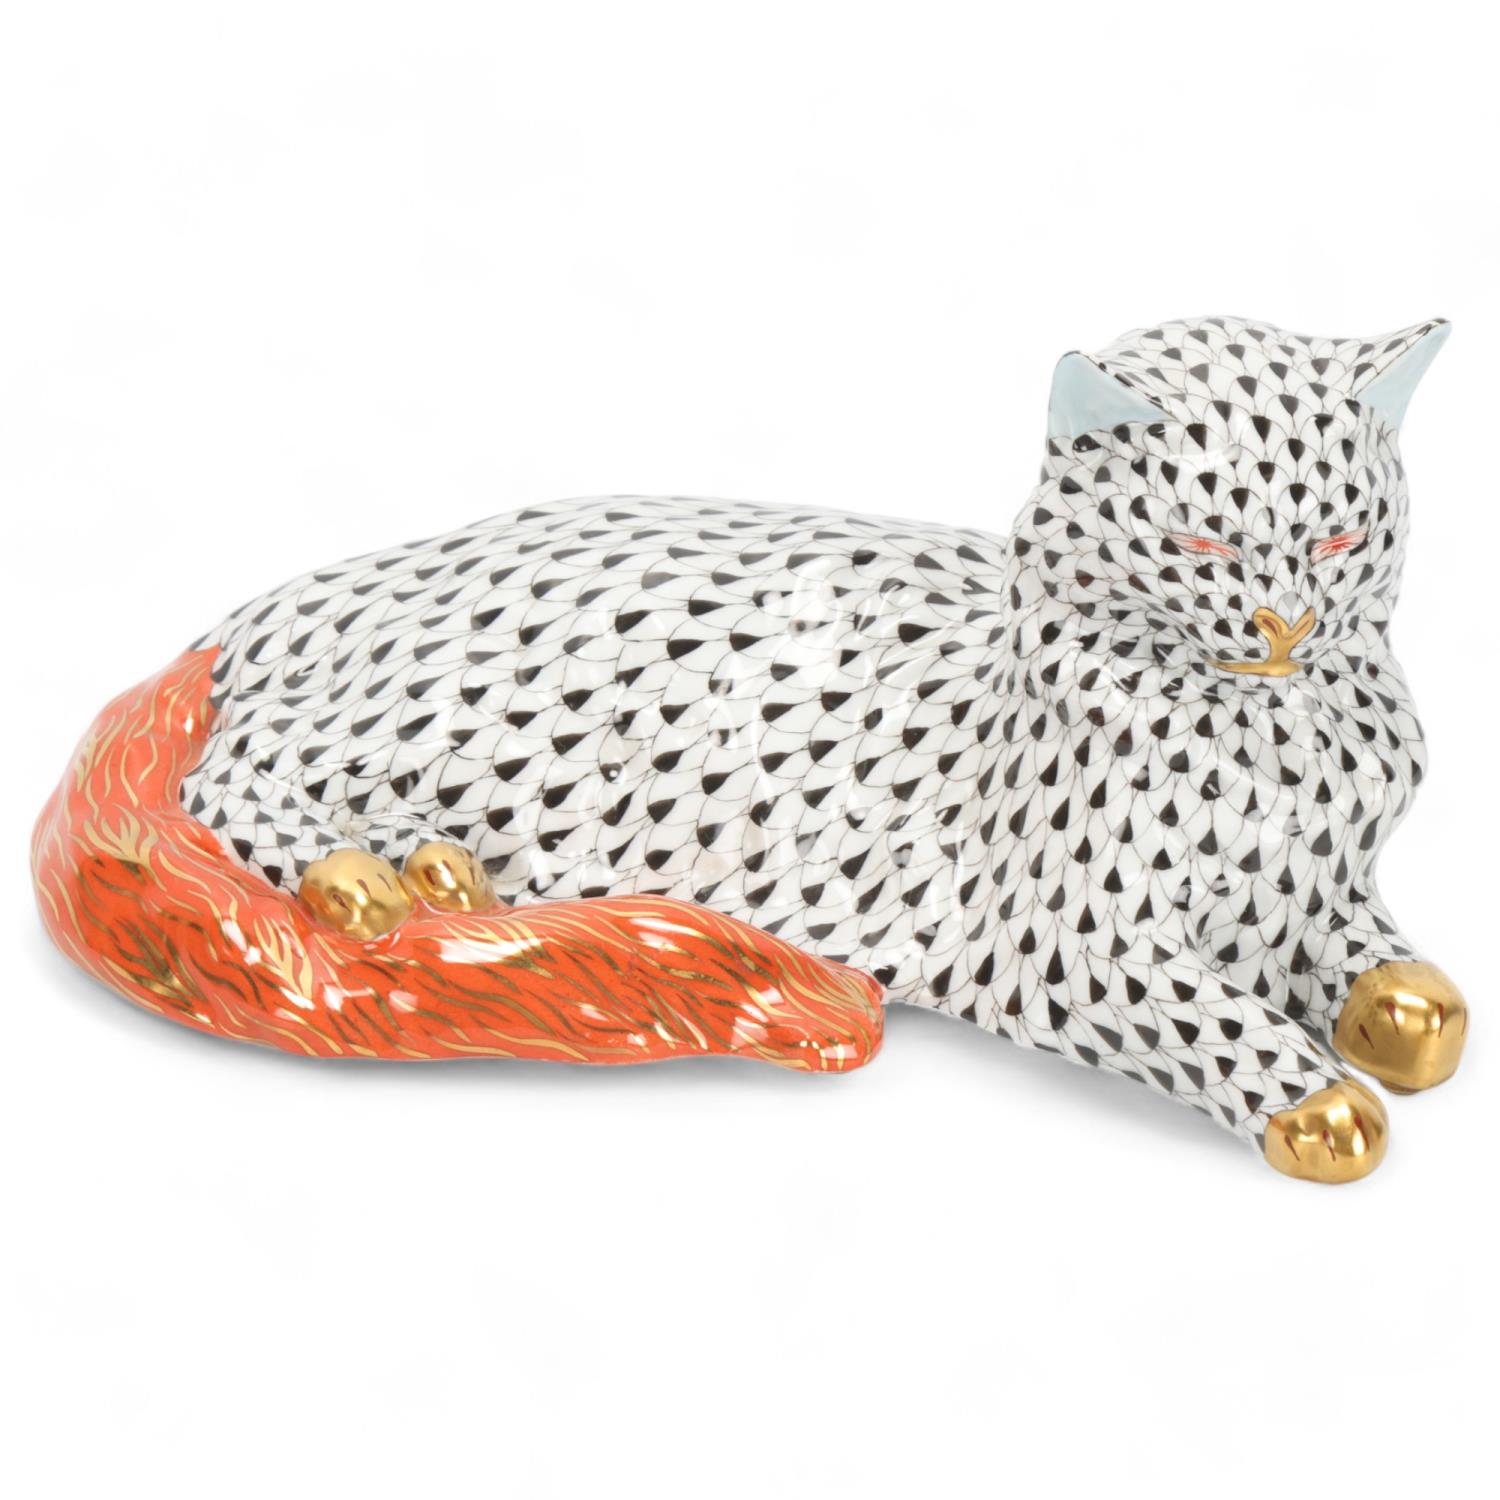 Herend Porcelain, large hand painted and gilded reclining cat, length 22cm Perfect condition